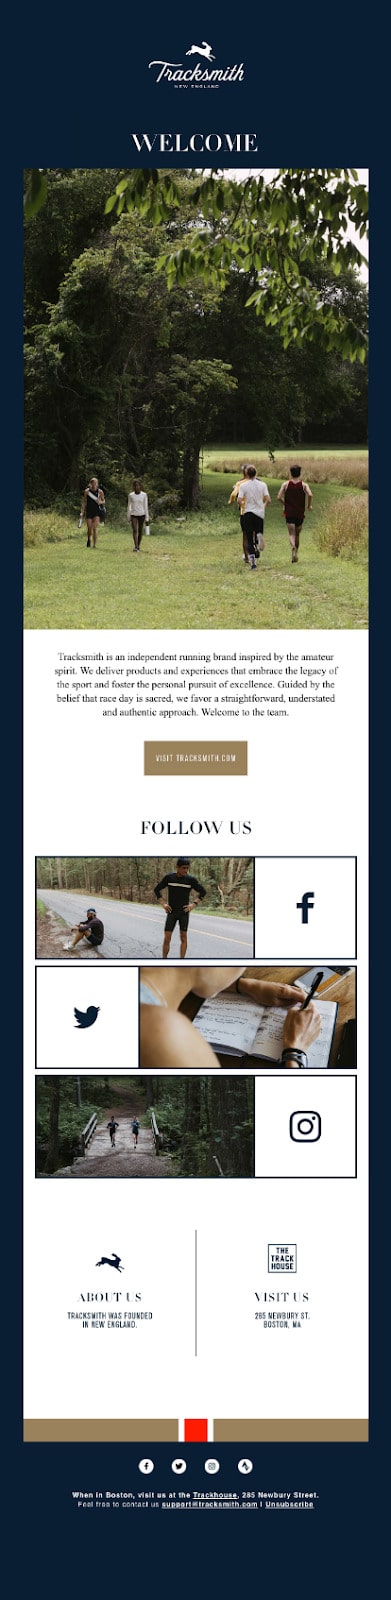 Tracksmith email example